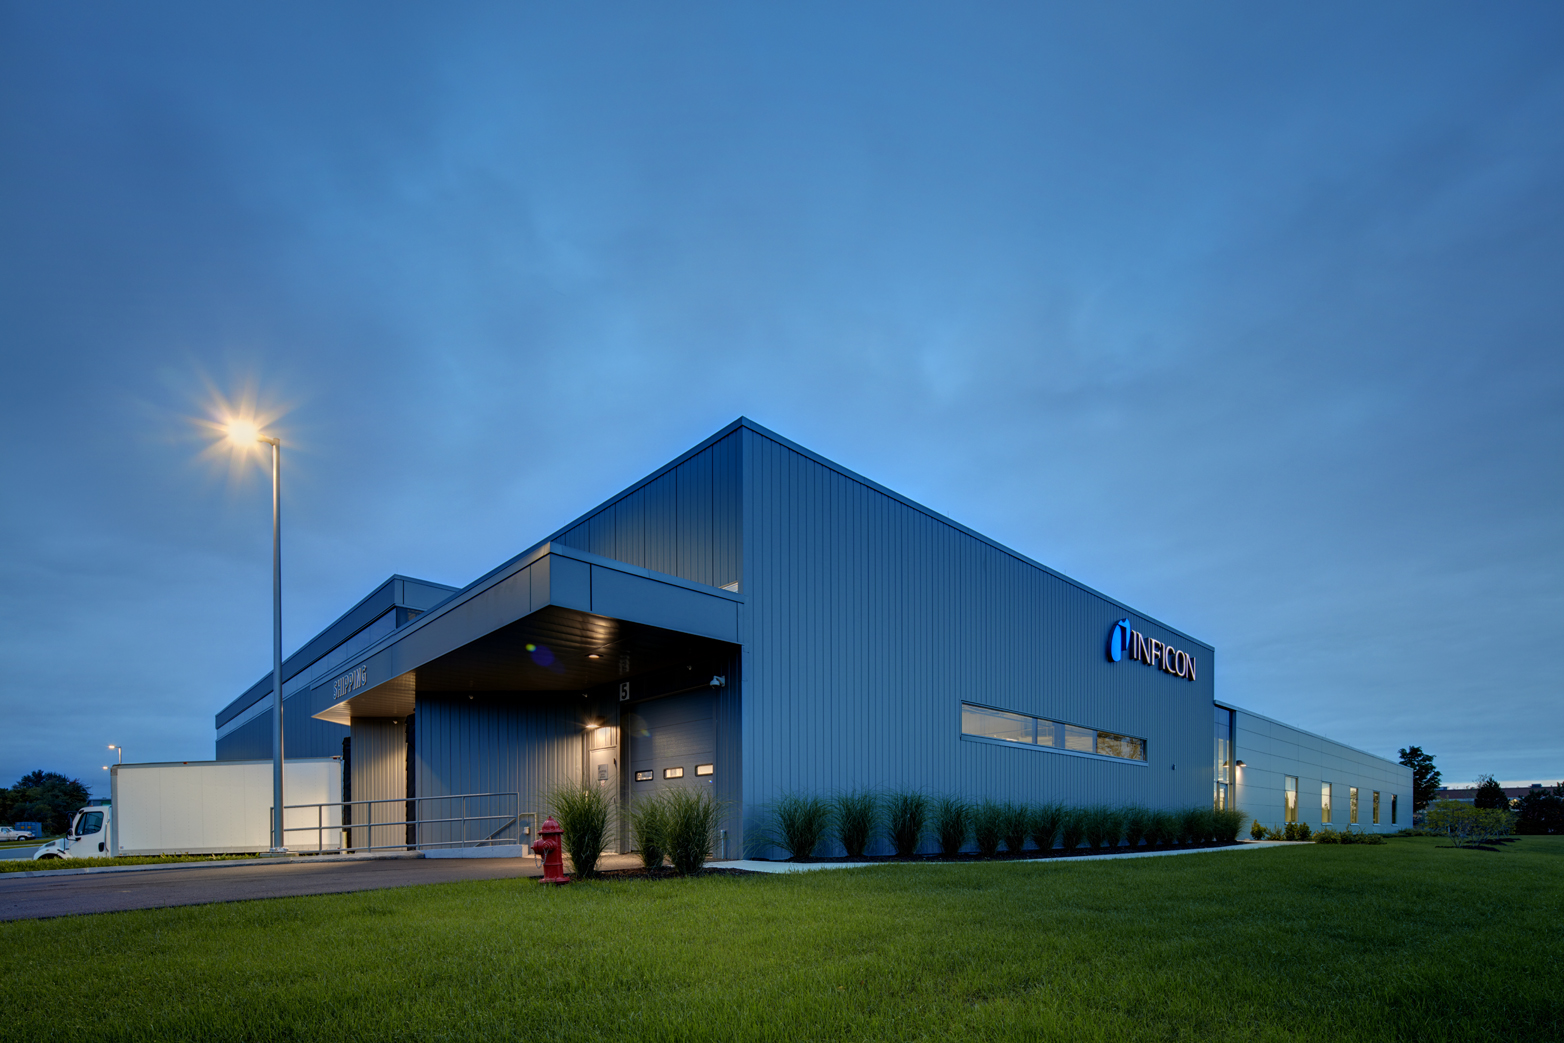 John P. Stopen Inficon Industrial Project exterior at night